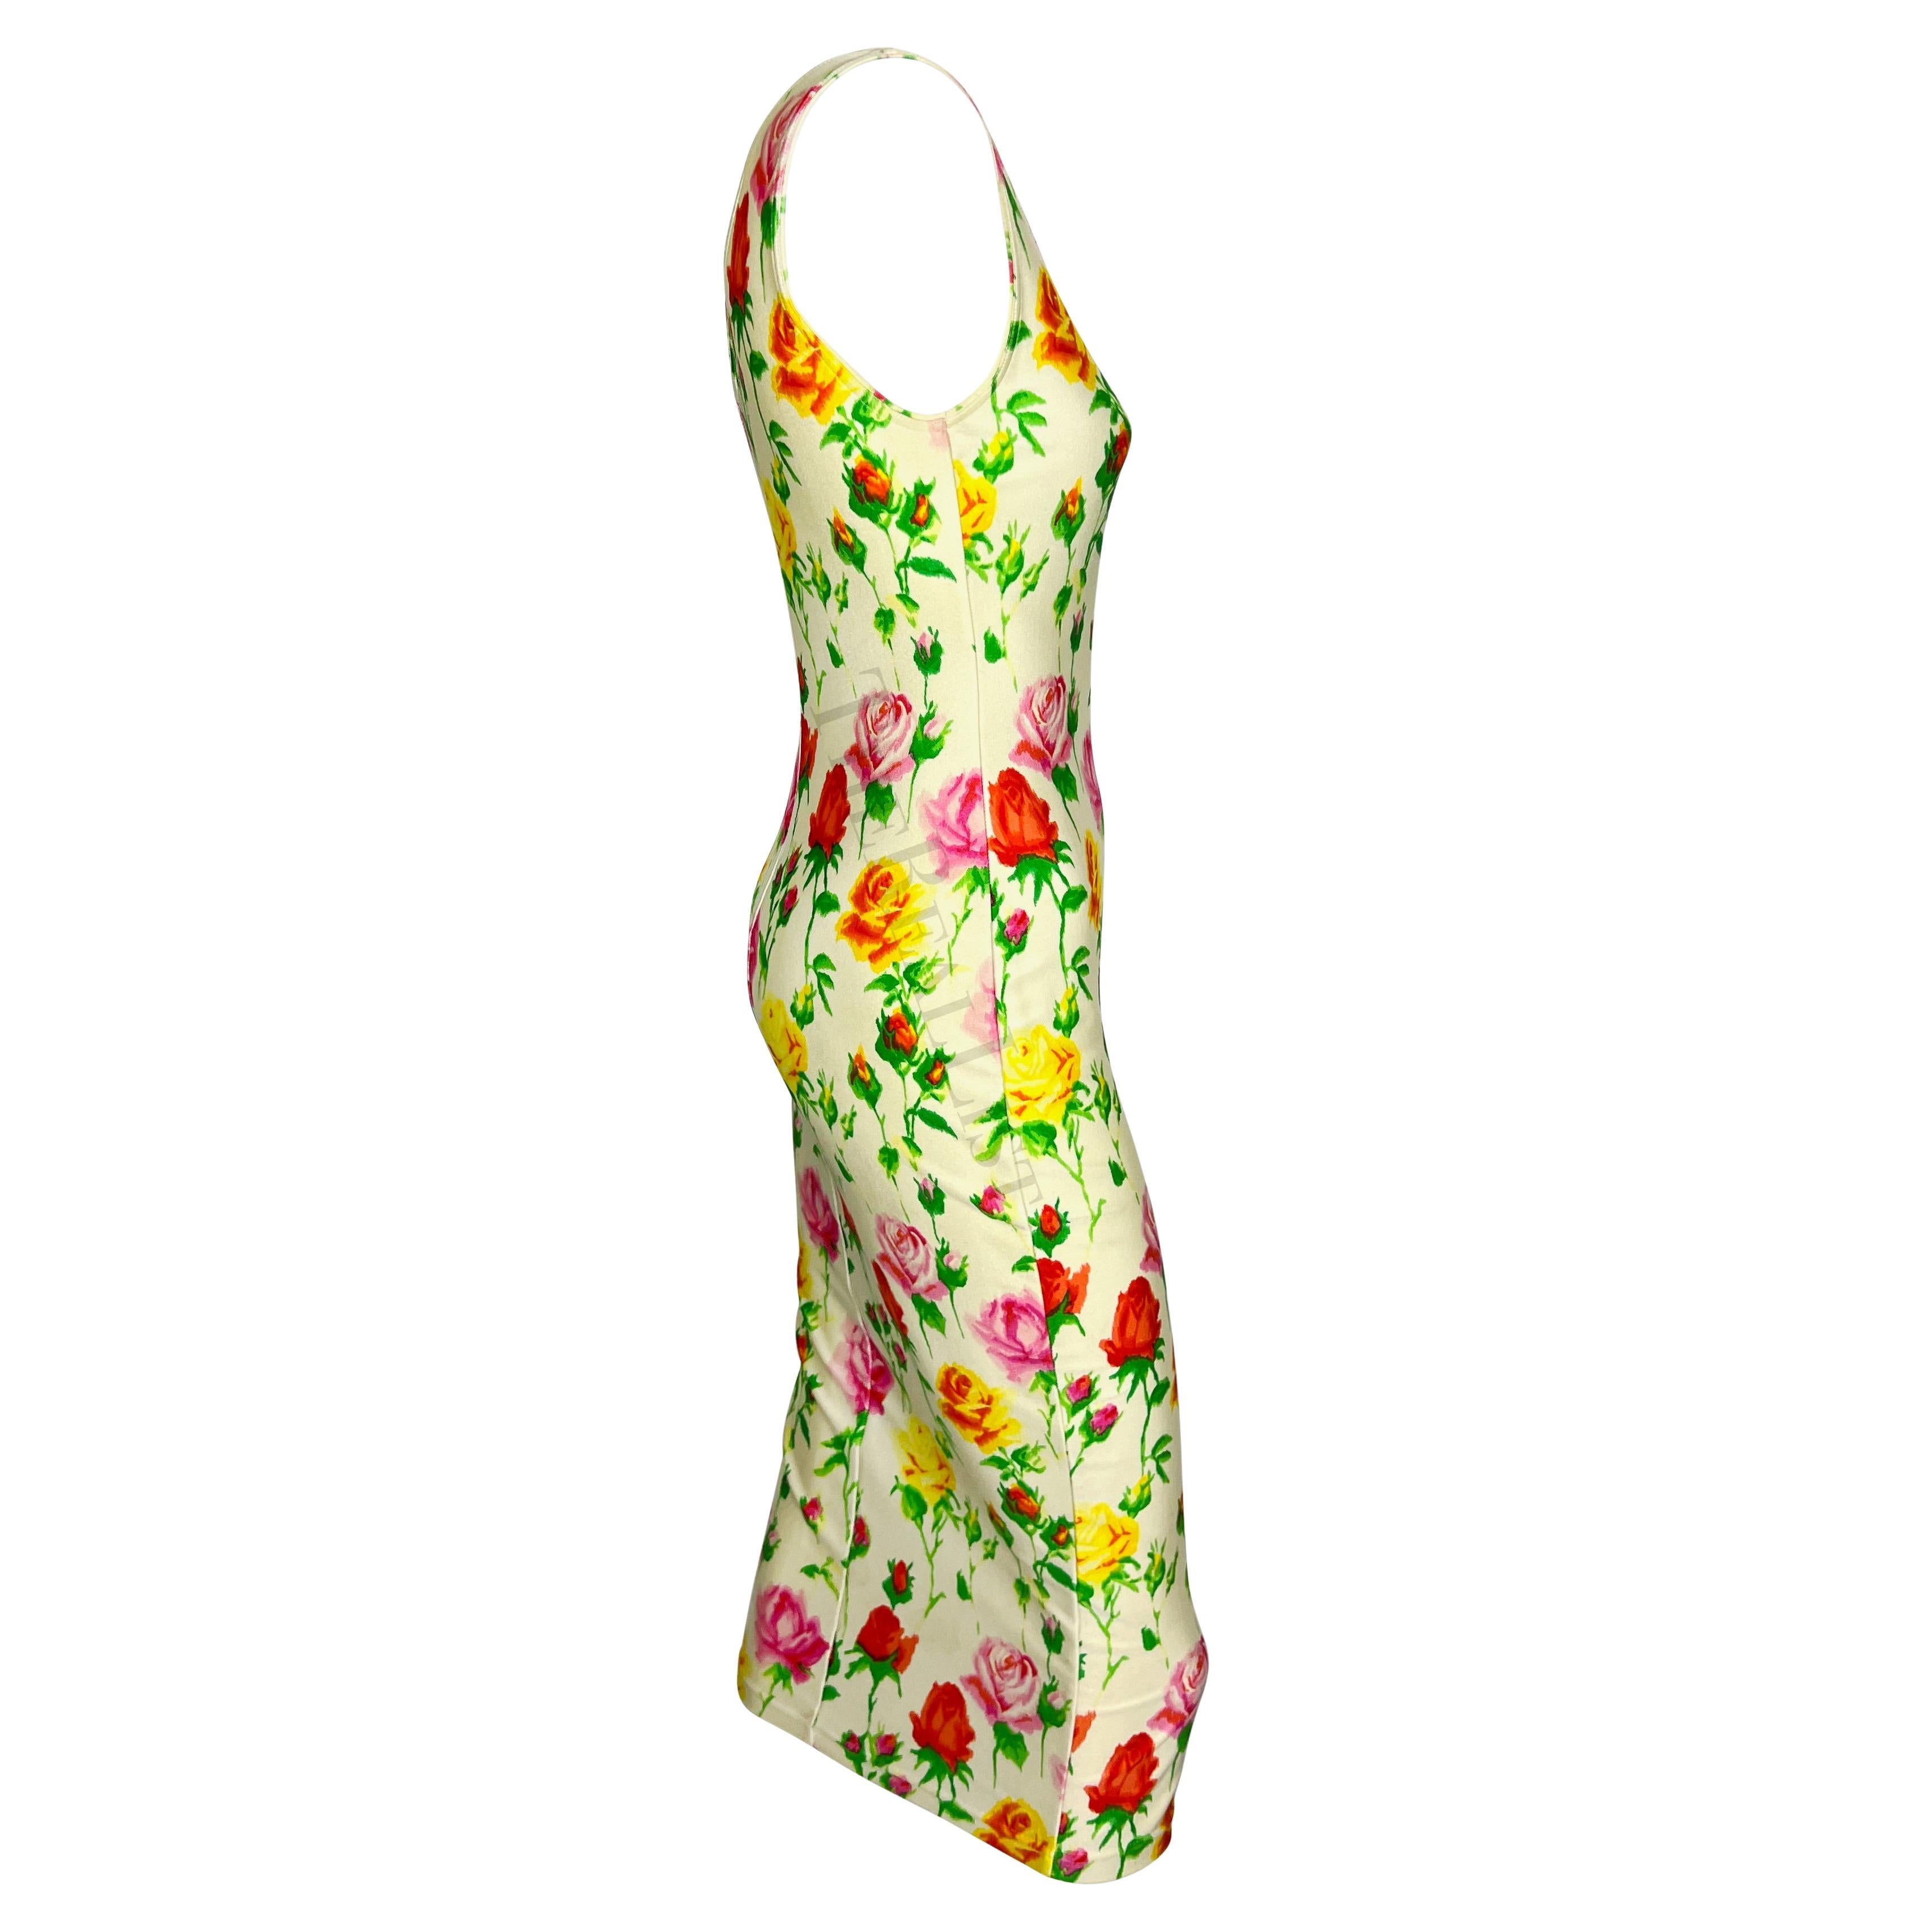 S/S 1995 Gianni Versace Runway White Floral Rose Bodycon Dress For Sale 4